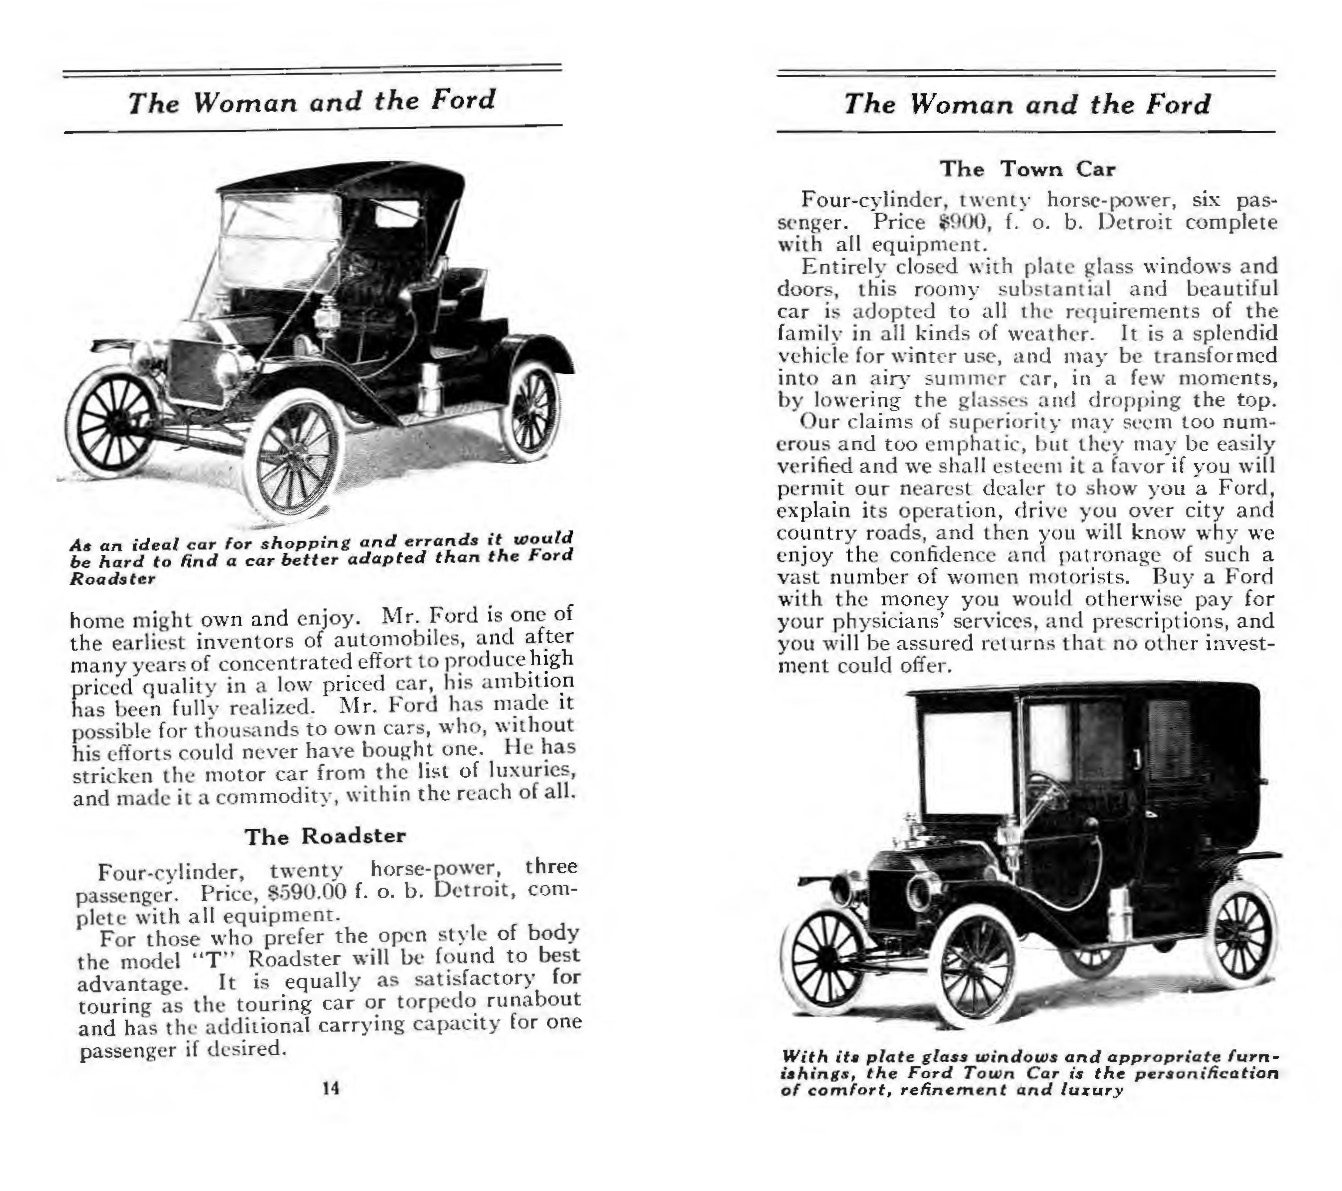 1912_The_Woman__the_Ford-14-15